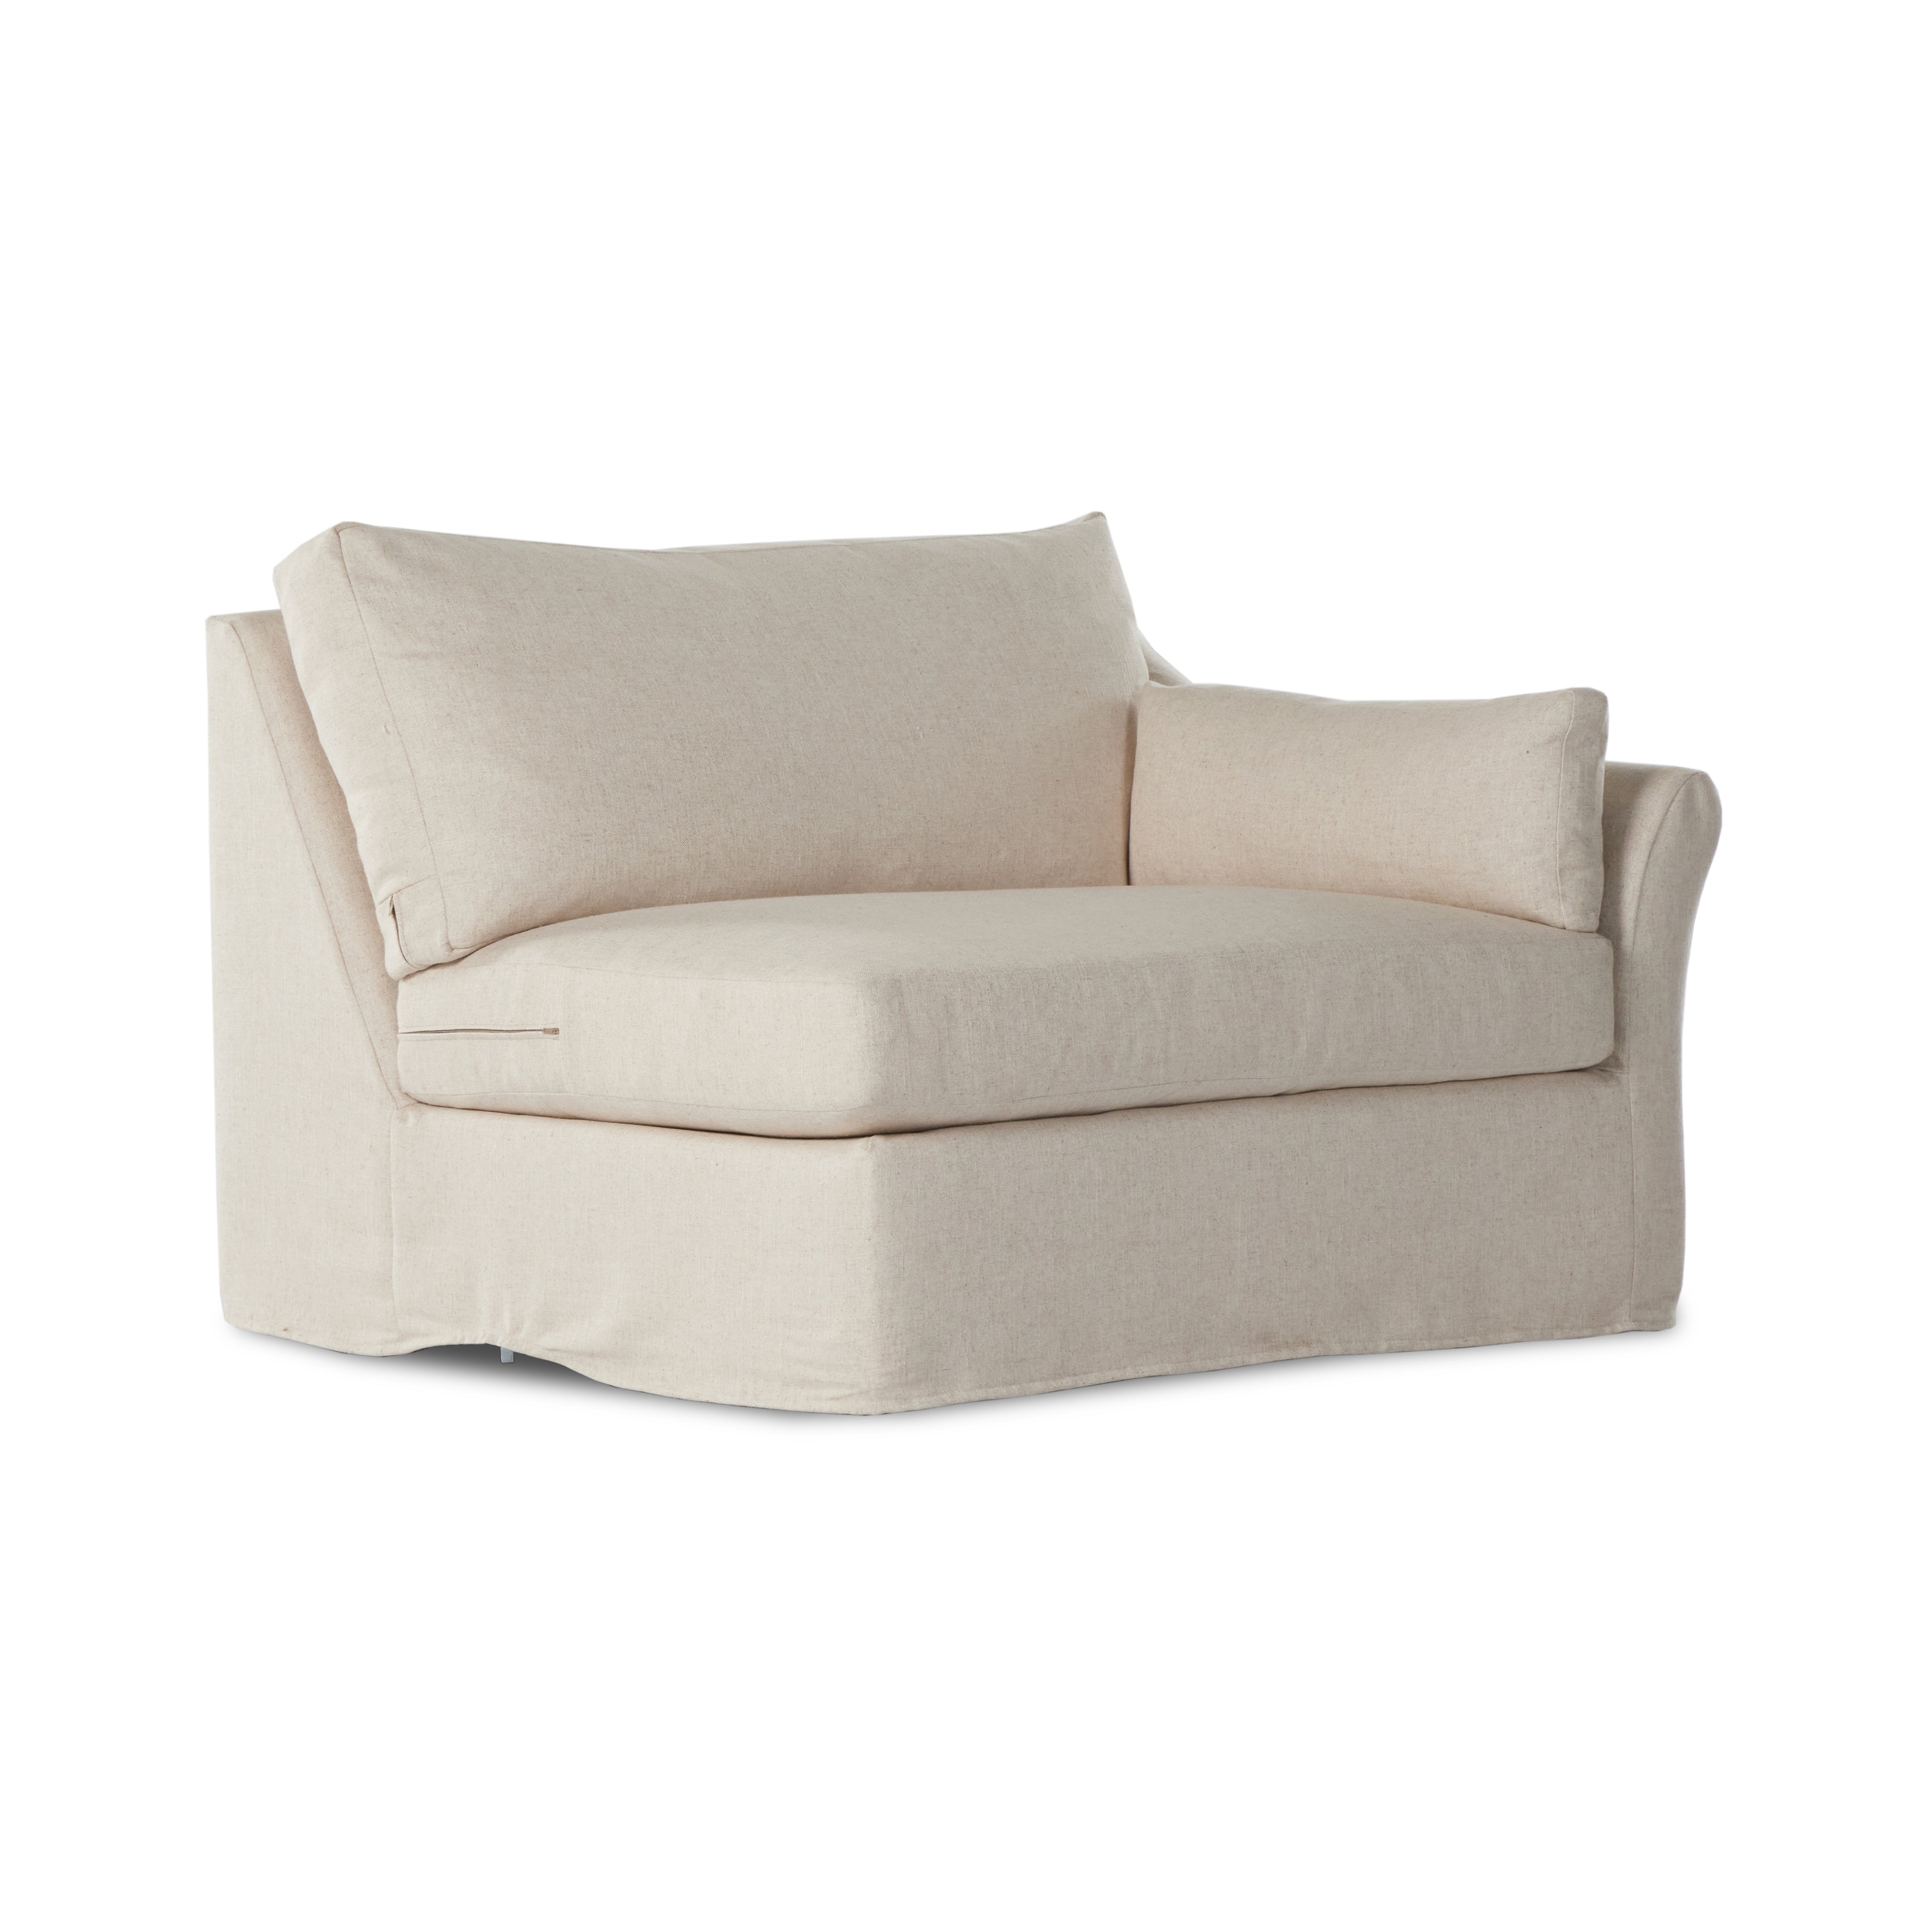 Build Your Own: Delray Slipcover Sectional